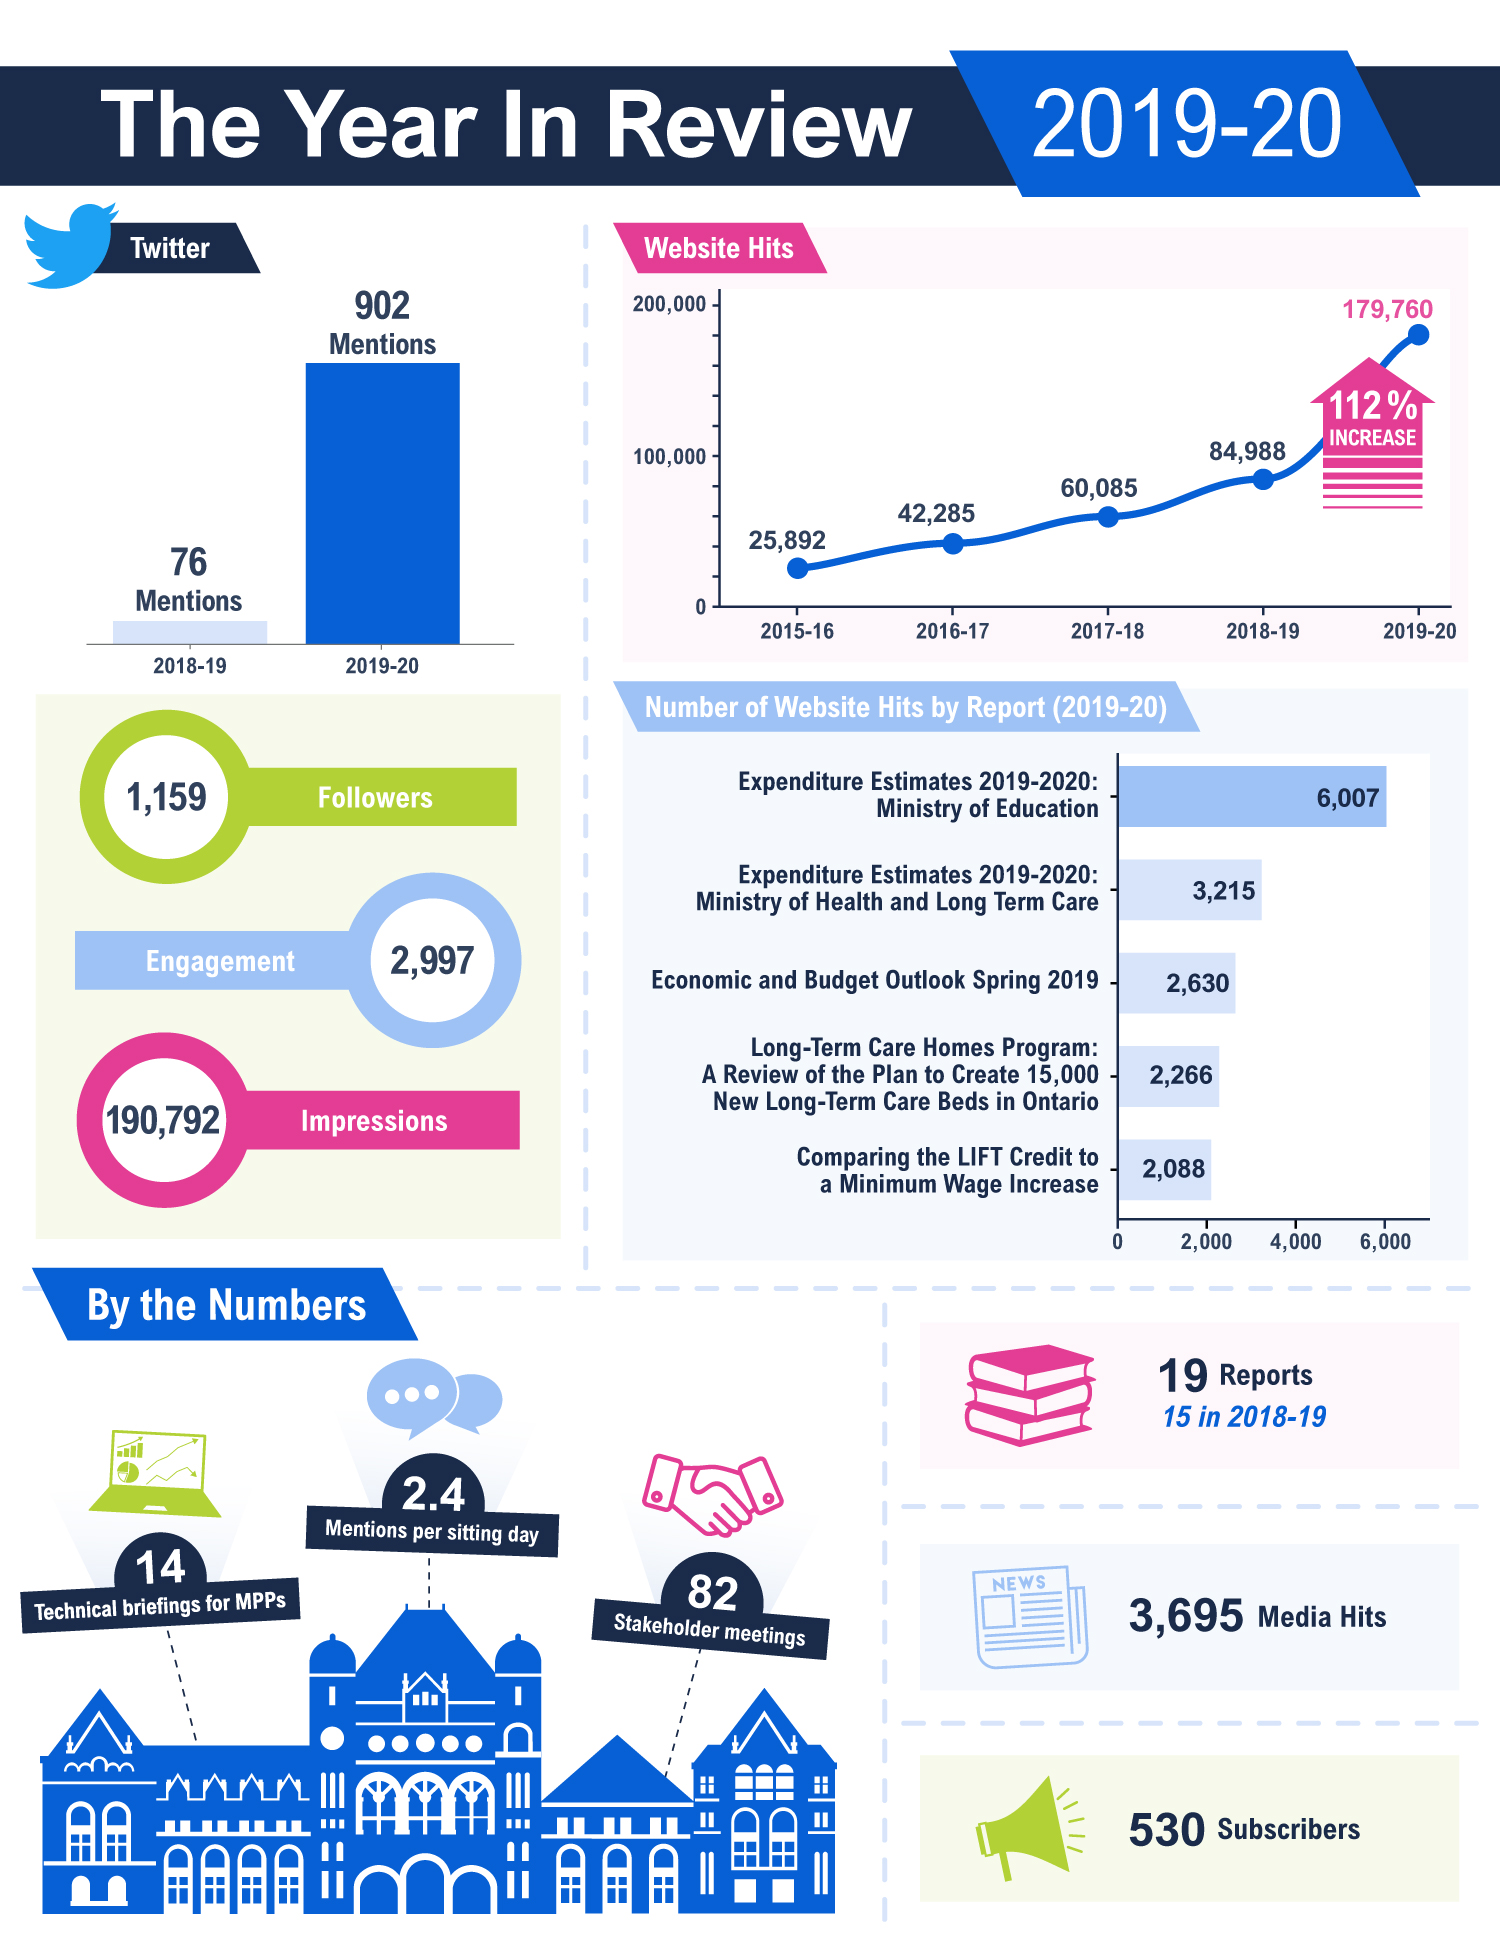 The infographic provides a summary of engagement metrics in 2019-20. The FAO produced 19 reports in 2019-20, four more than the previous year. The website had a total of 179,760 views, a 112 per cent increase from 2018-19. The largest number of website hits was for the <em>Expenditure Estimates 2019-2020: Ministry of Education</em> report which saw 6,007 hits, followed by <em>Expenditure Estimates 2019-2020: Ministry of Health and Long-Term Care</em> report which saw 3,215 hits and the <em>Economic and Budget Outlook, Spring 2019</em>, which saw 2,630 hits. Looking at media engagement, the FAO had 3,695 media hits this year. Our subscribers grew to 530. The FAO held 14 technical briefings for MPPs and 82 stakeholder meetings. The FAO was mentioned on an average of 2.4 times per sitting day in the Assembly. The FAO was mentioned 902 times on Twitter in 2019-20, compared to the 72 mentions in 2018-19. The follower count reached 1,159 in 2019-20 with 190, 792 impressions and an engagement of 2,997.